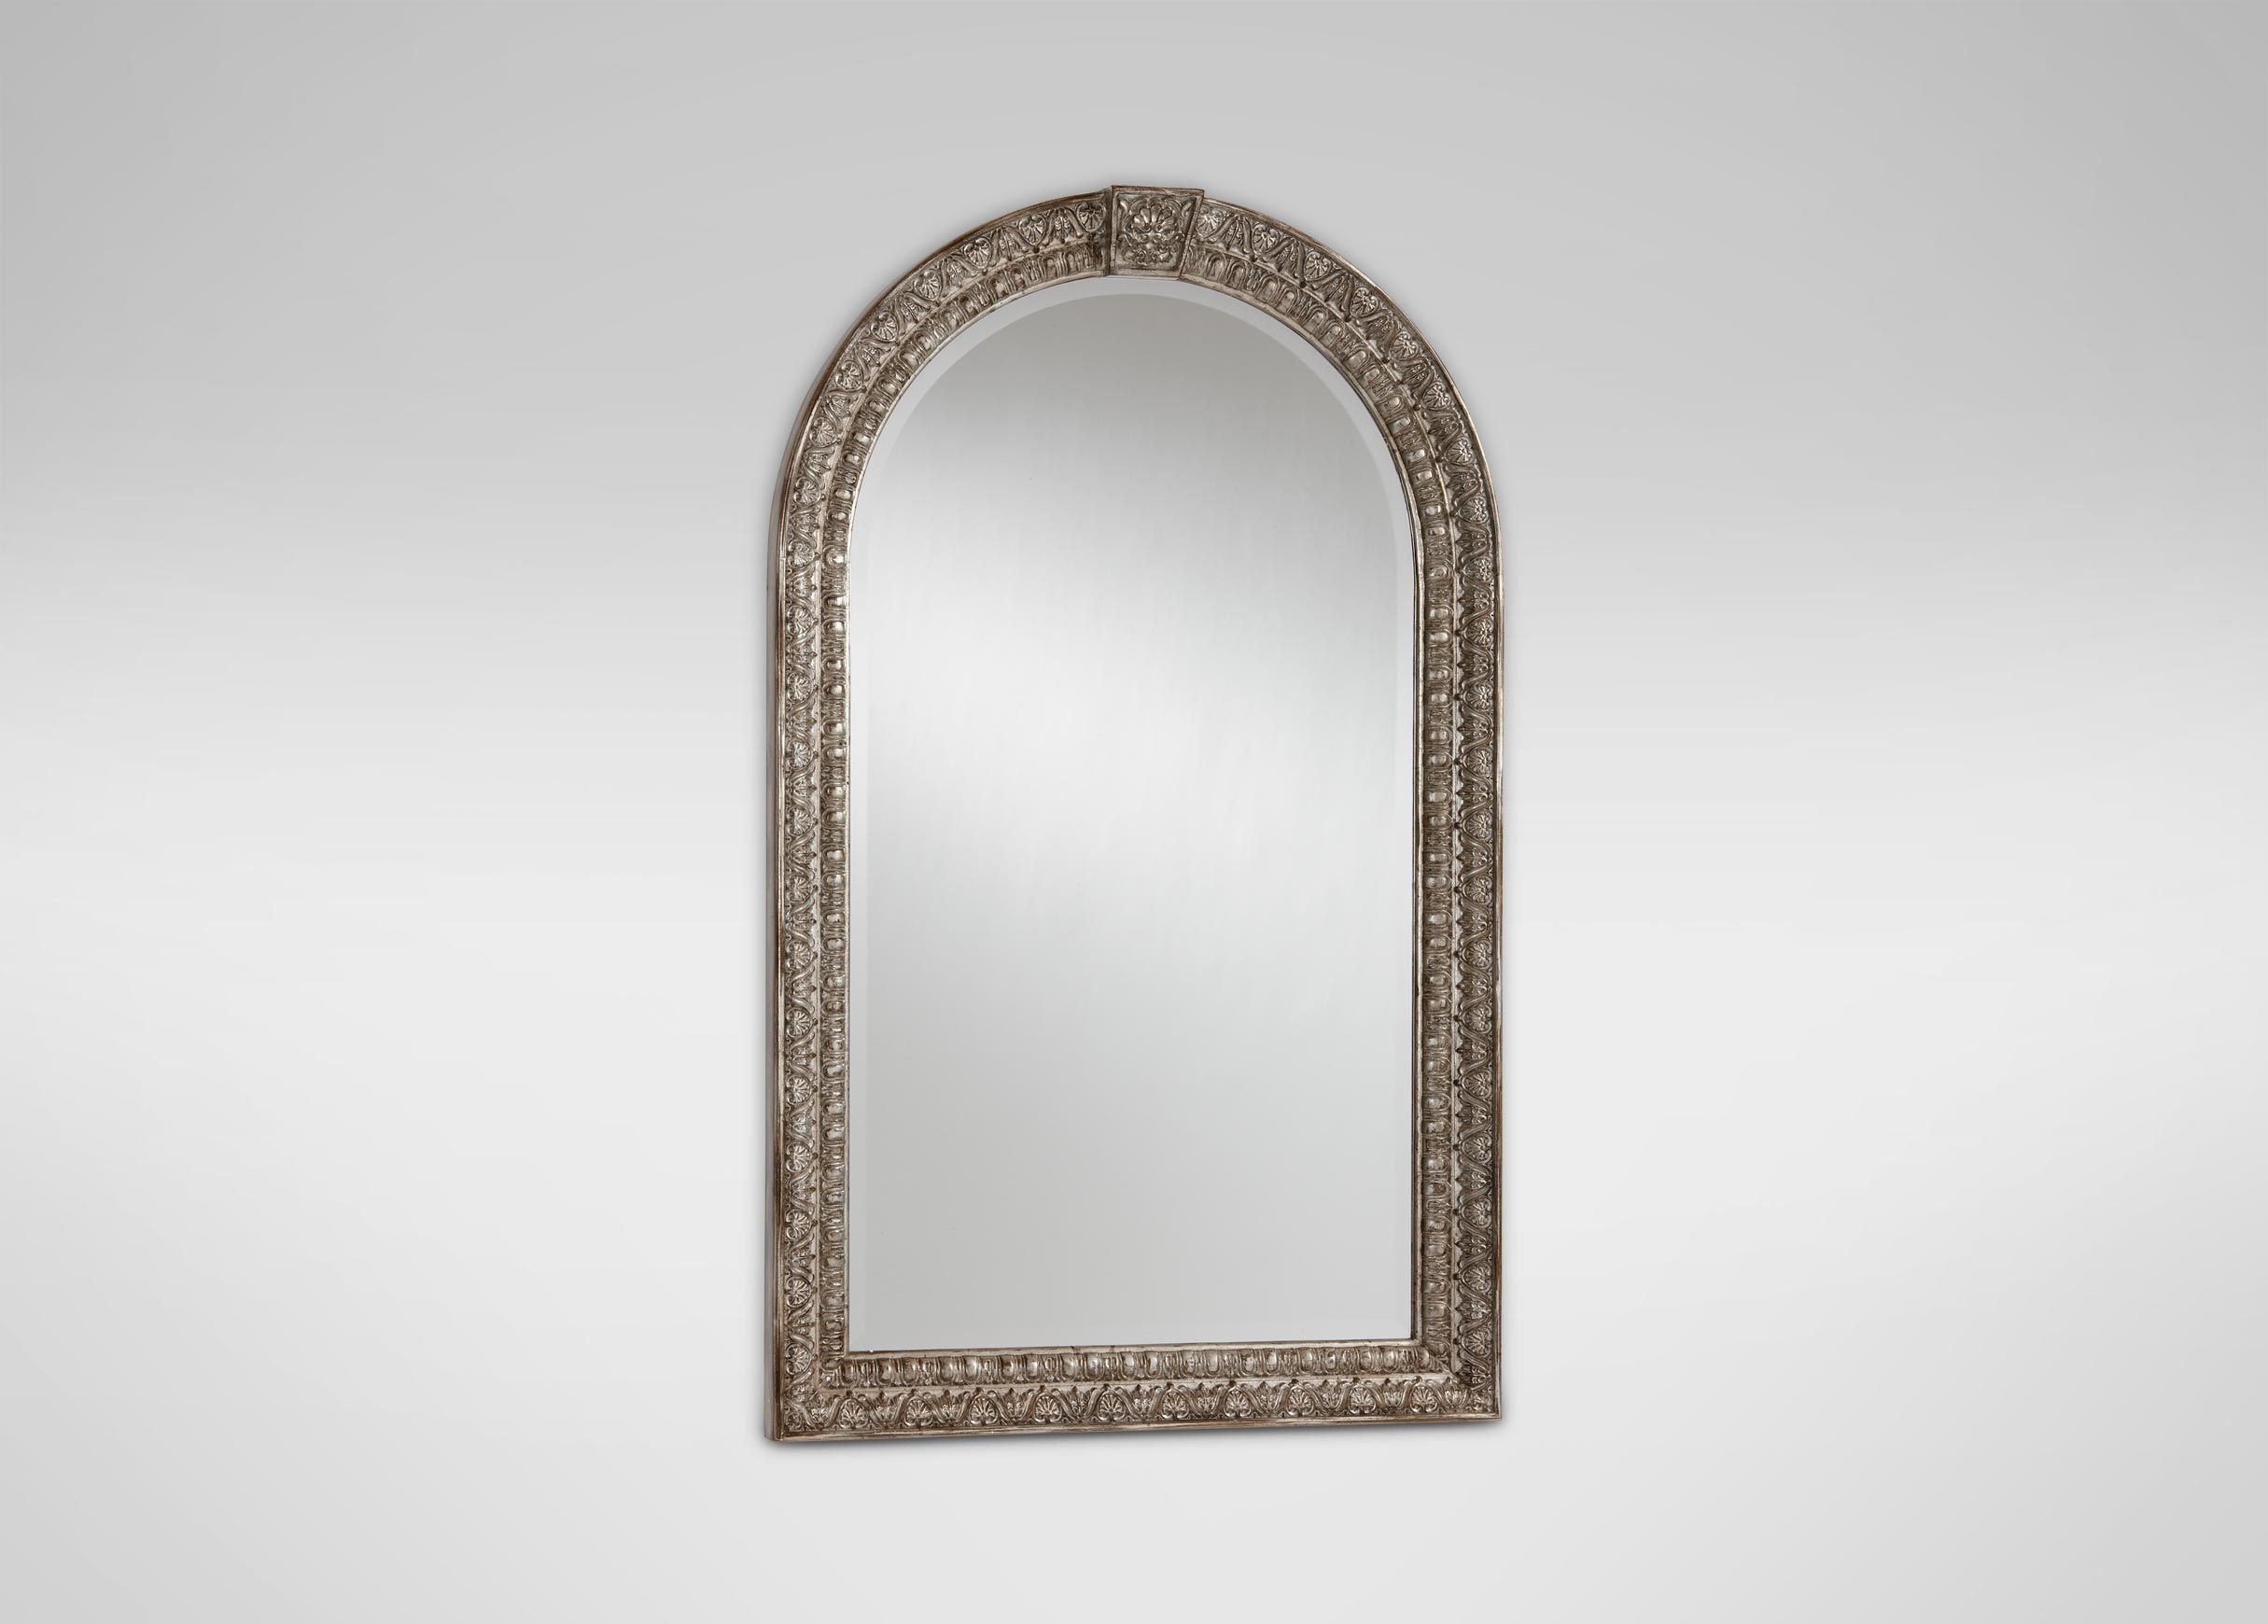 Antique Silver Arched Mirror | Mirrors | Arched Mirror, Mirror, Antiques Regarding Silver Arch Mirrors (View 6 of 15)